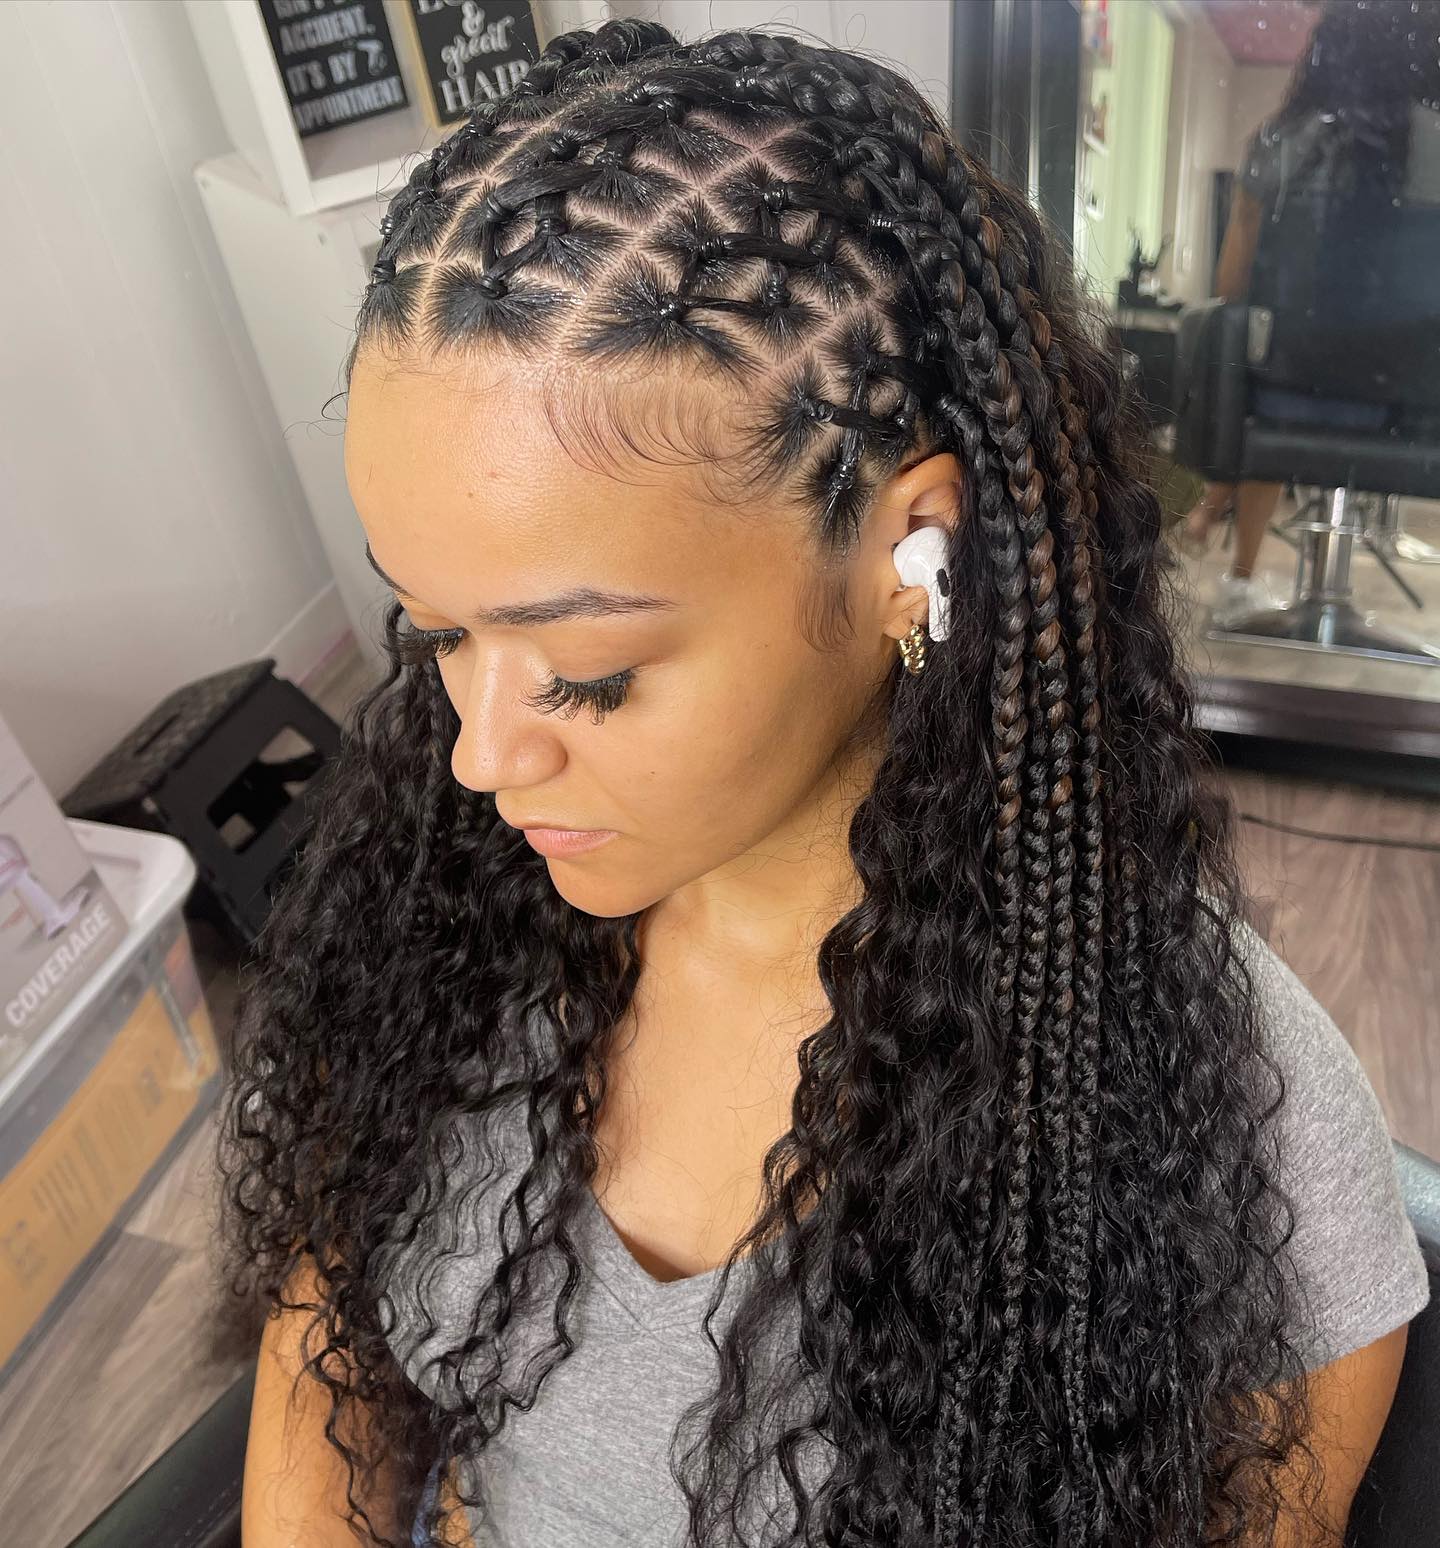 Image of Criss Cross Braids With Curls in the style of Braids With Curls